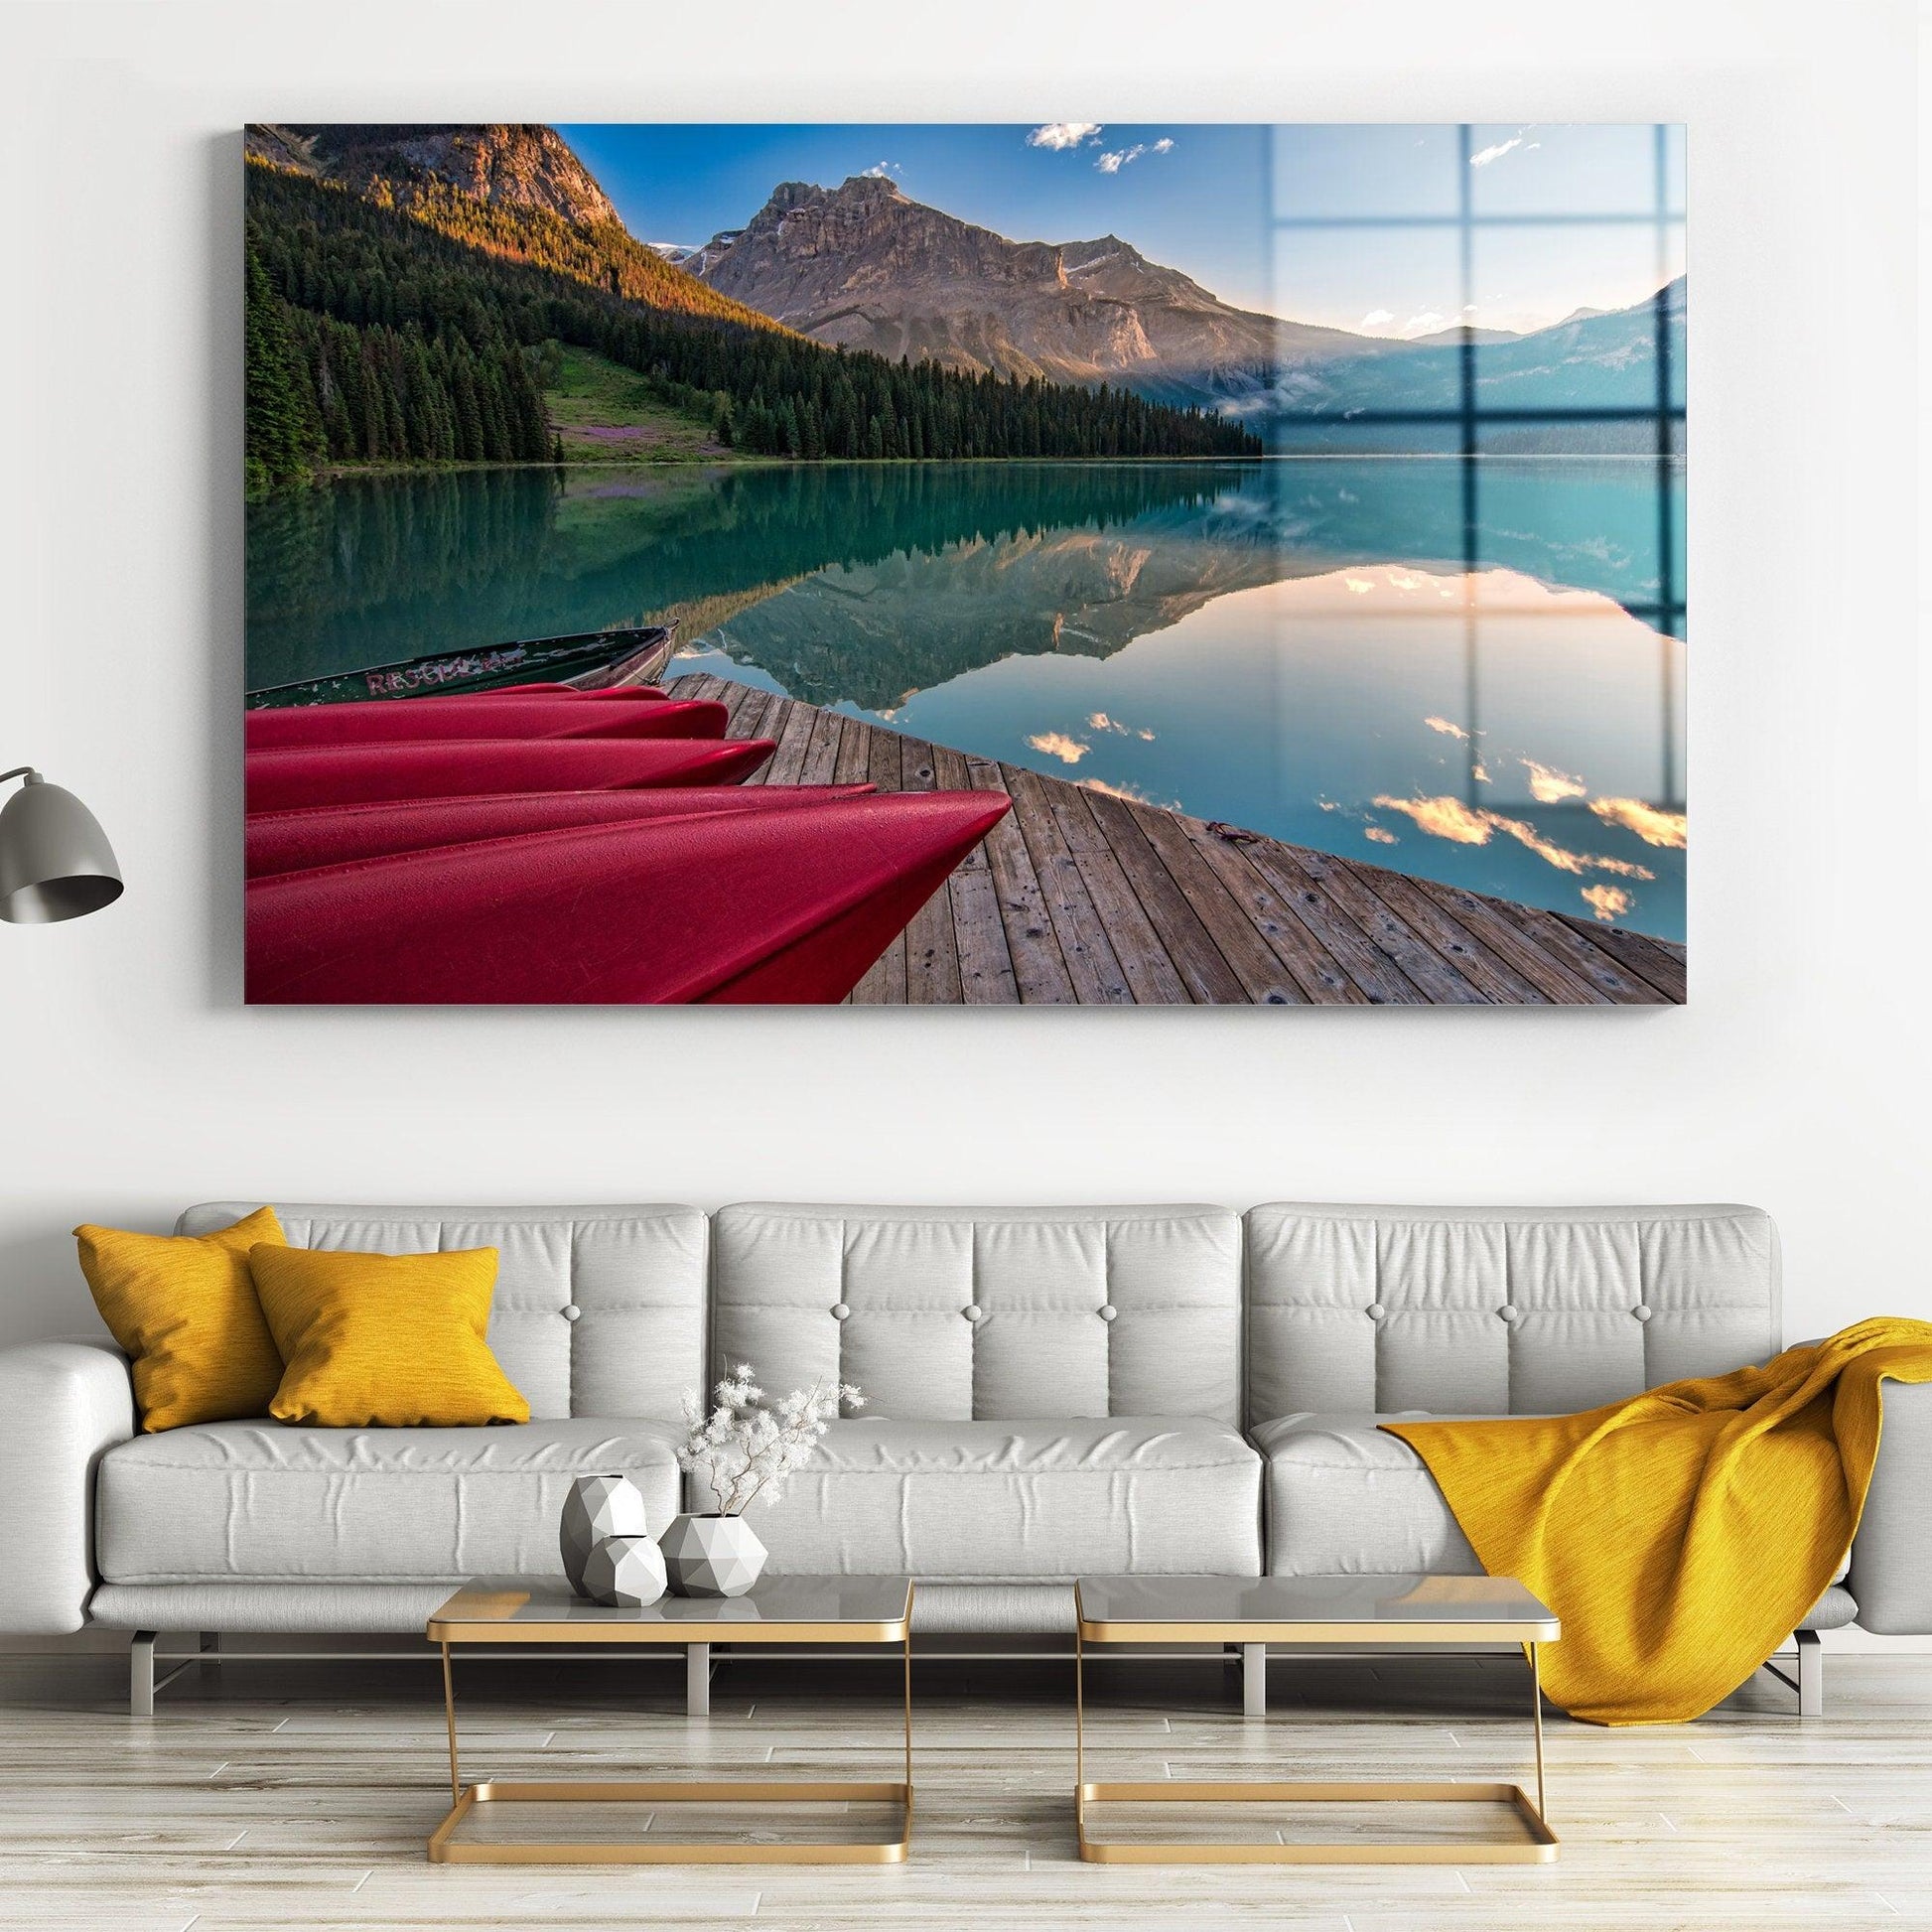 Landscape glass printing wall art | Silence Fishing Boat Poster Print, Scenic Landscape Photography On Canvas Print, Wooden Boat Wall Decor